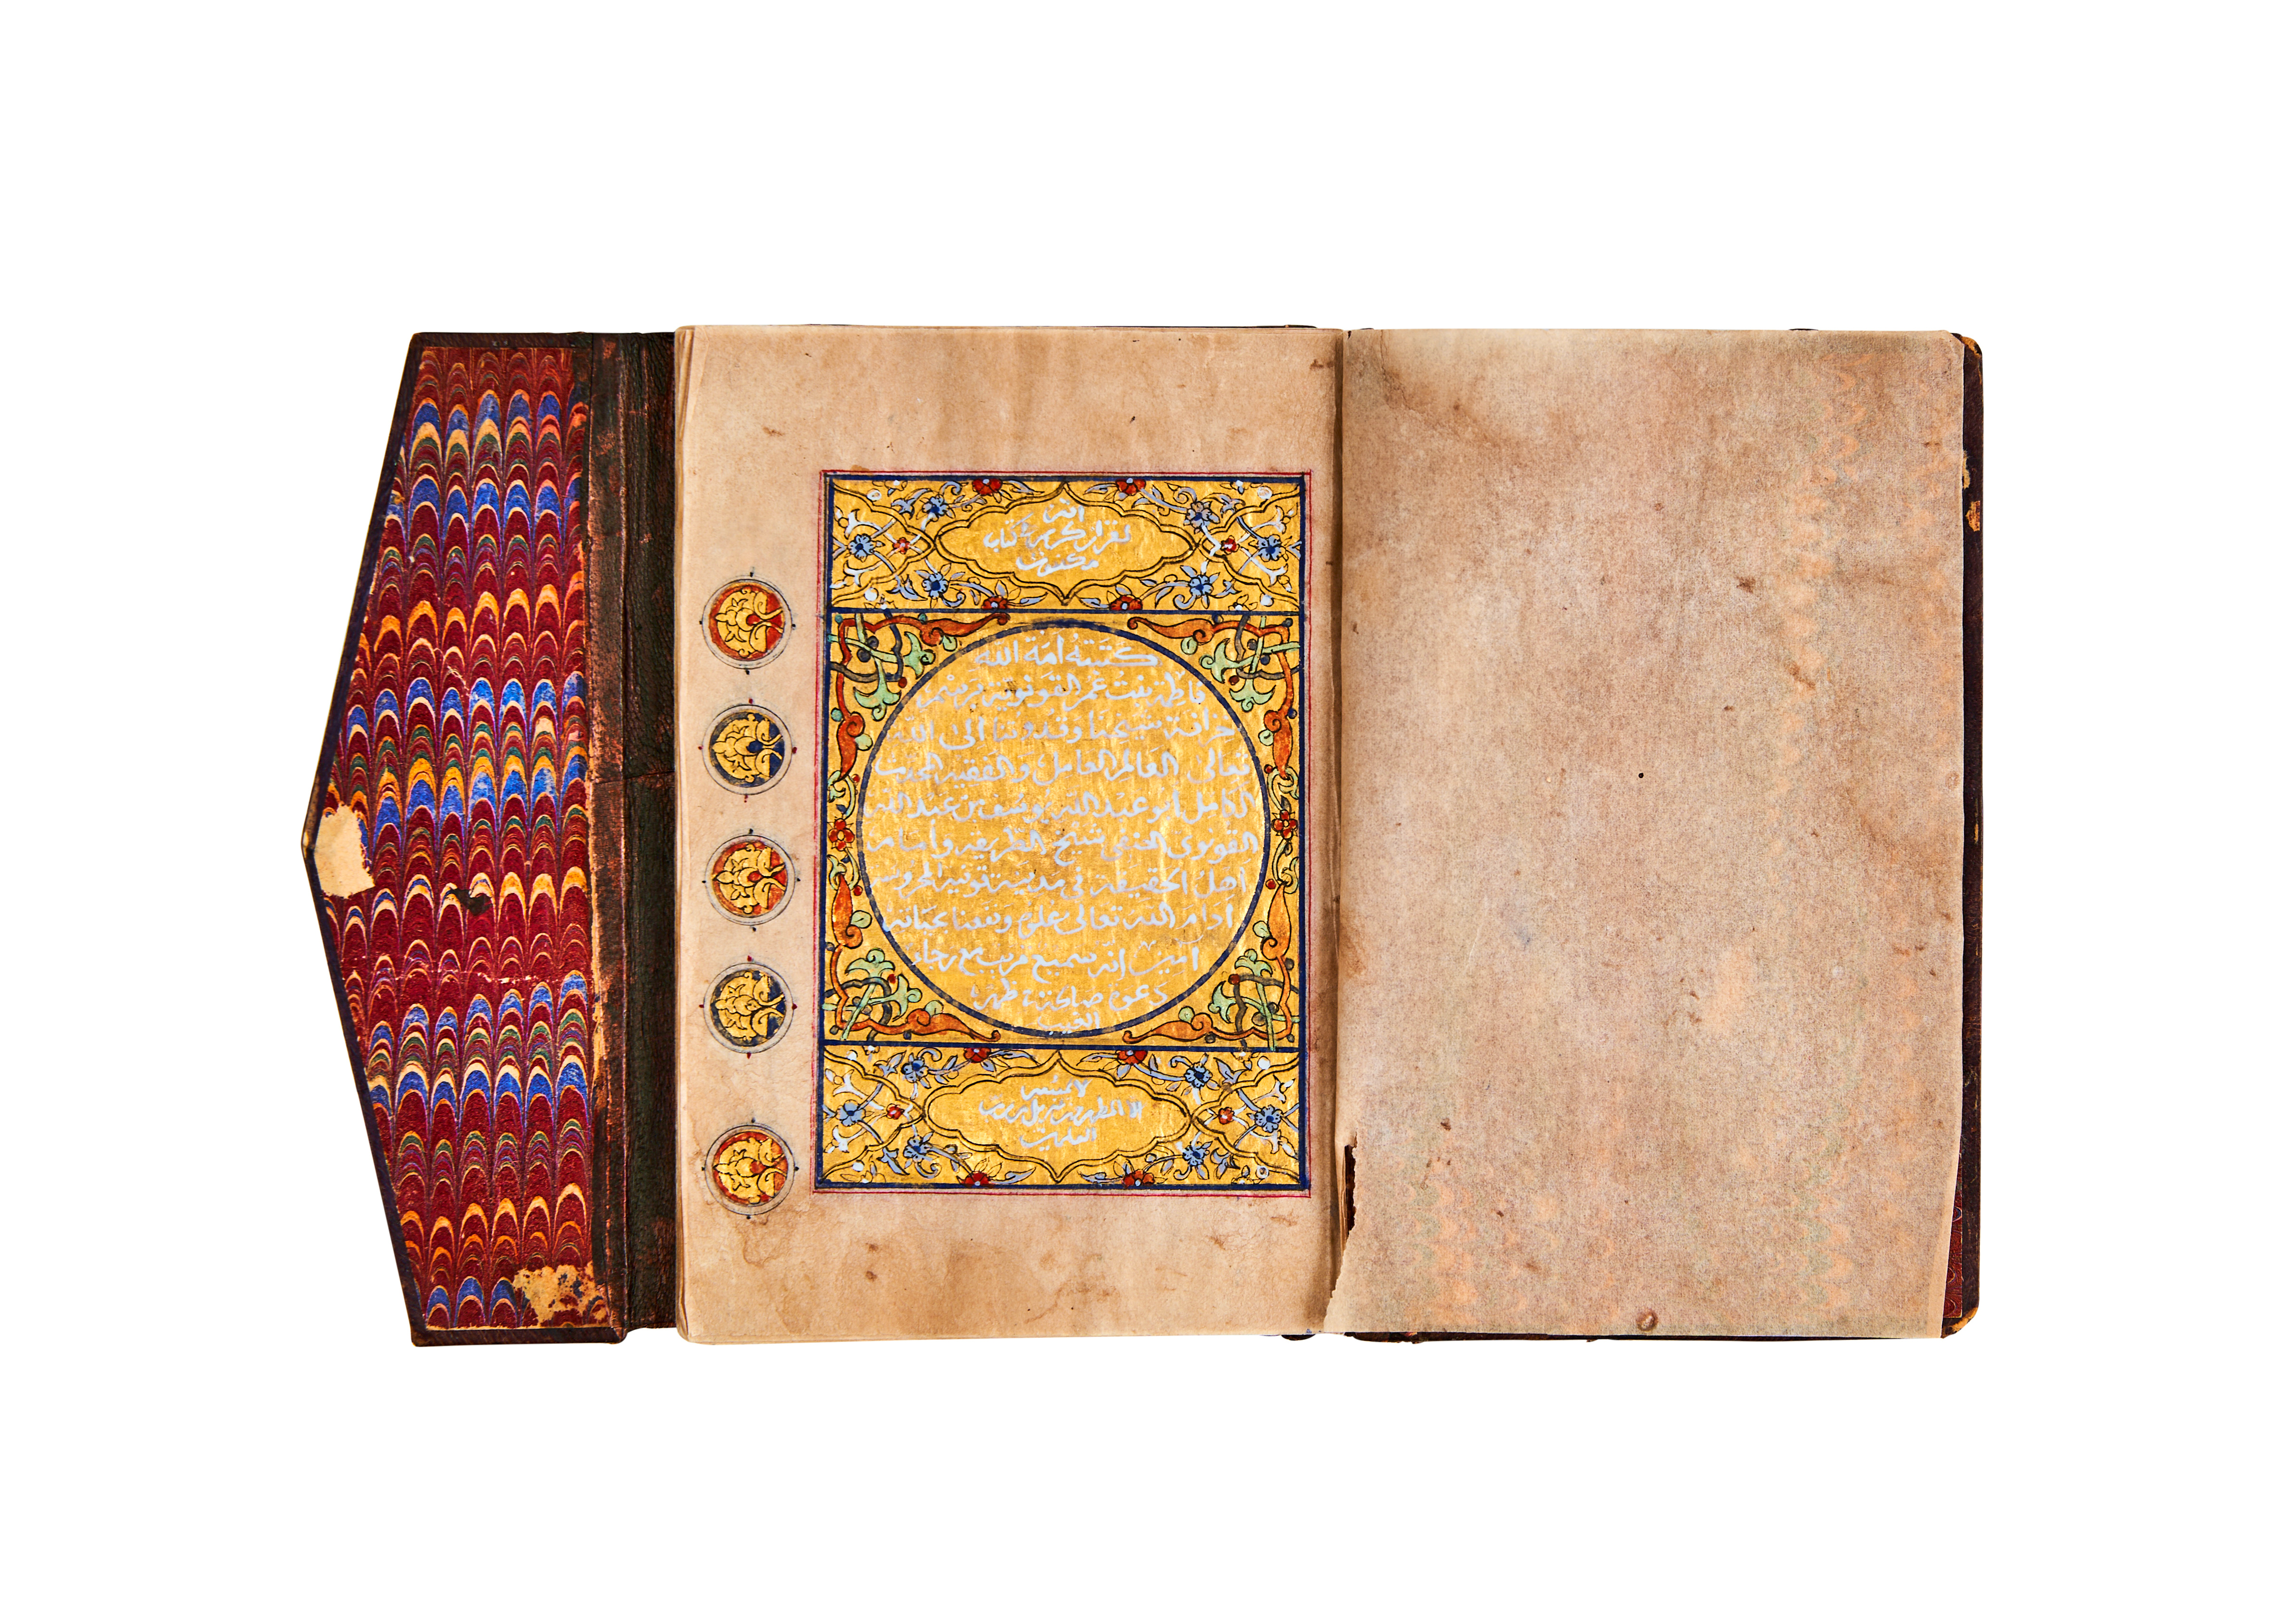 A COMPLETE GOLD MINIATURE QURAN, FOR HIS EXCELLENCE ABU ABDALLAH YUSEF, DATED 1288AH, COPIED BY FAT - Image 2 of 9